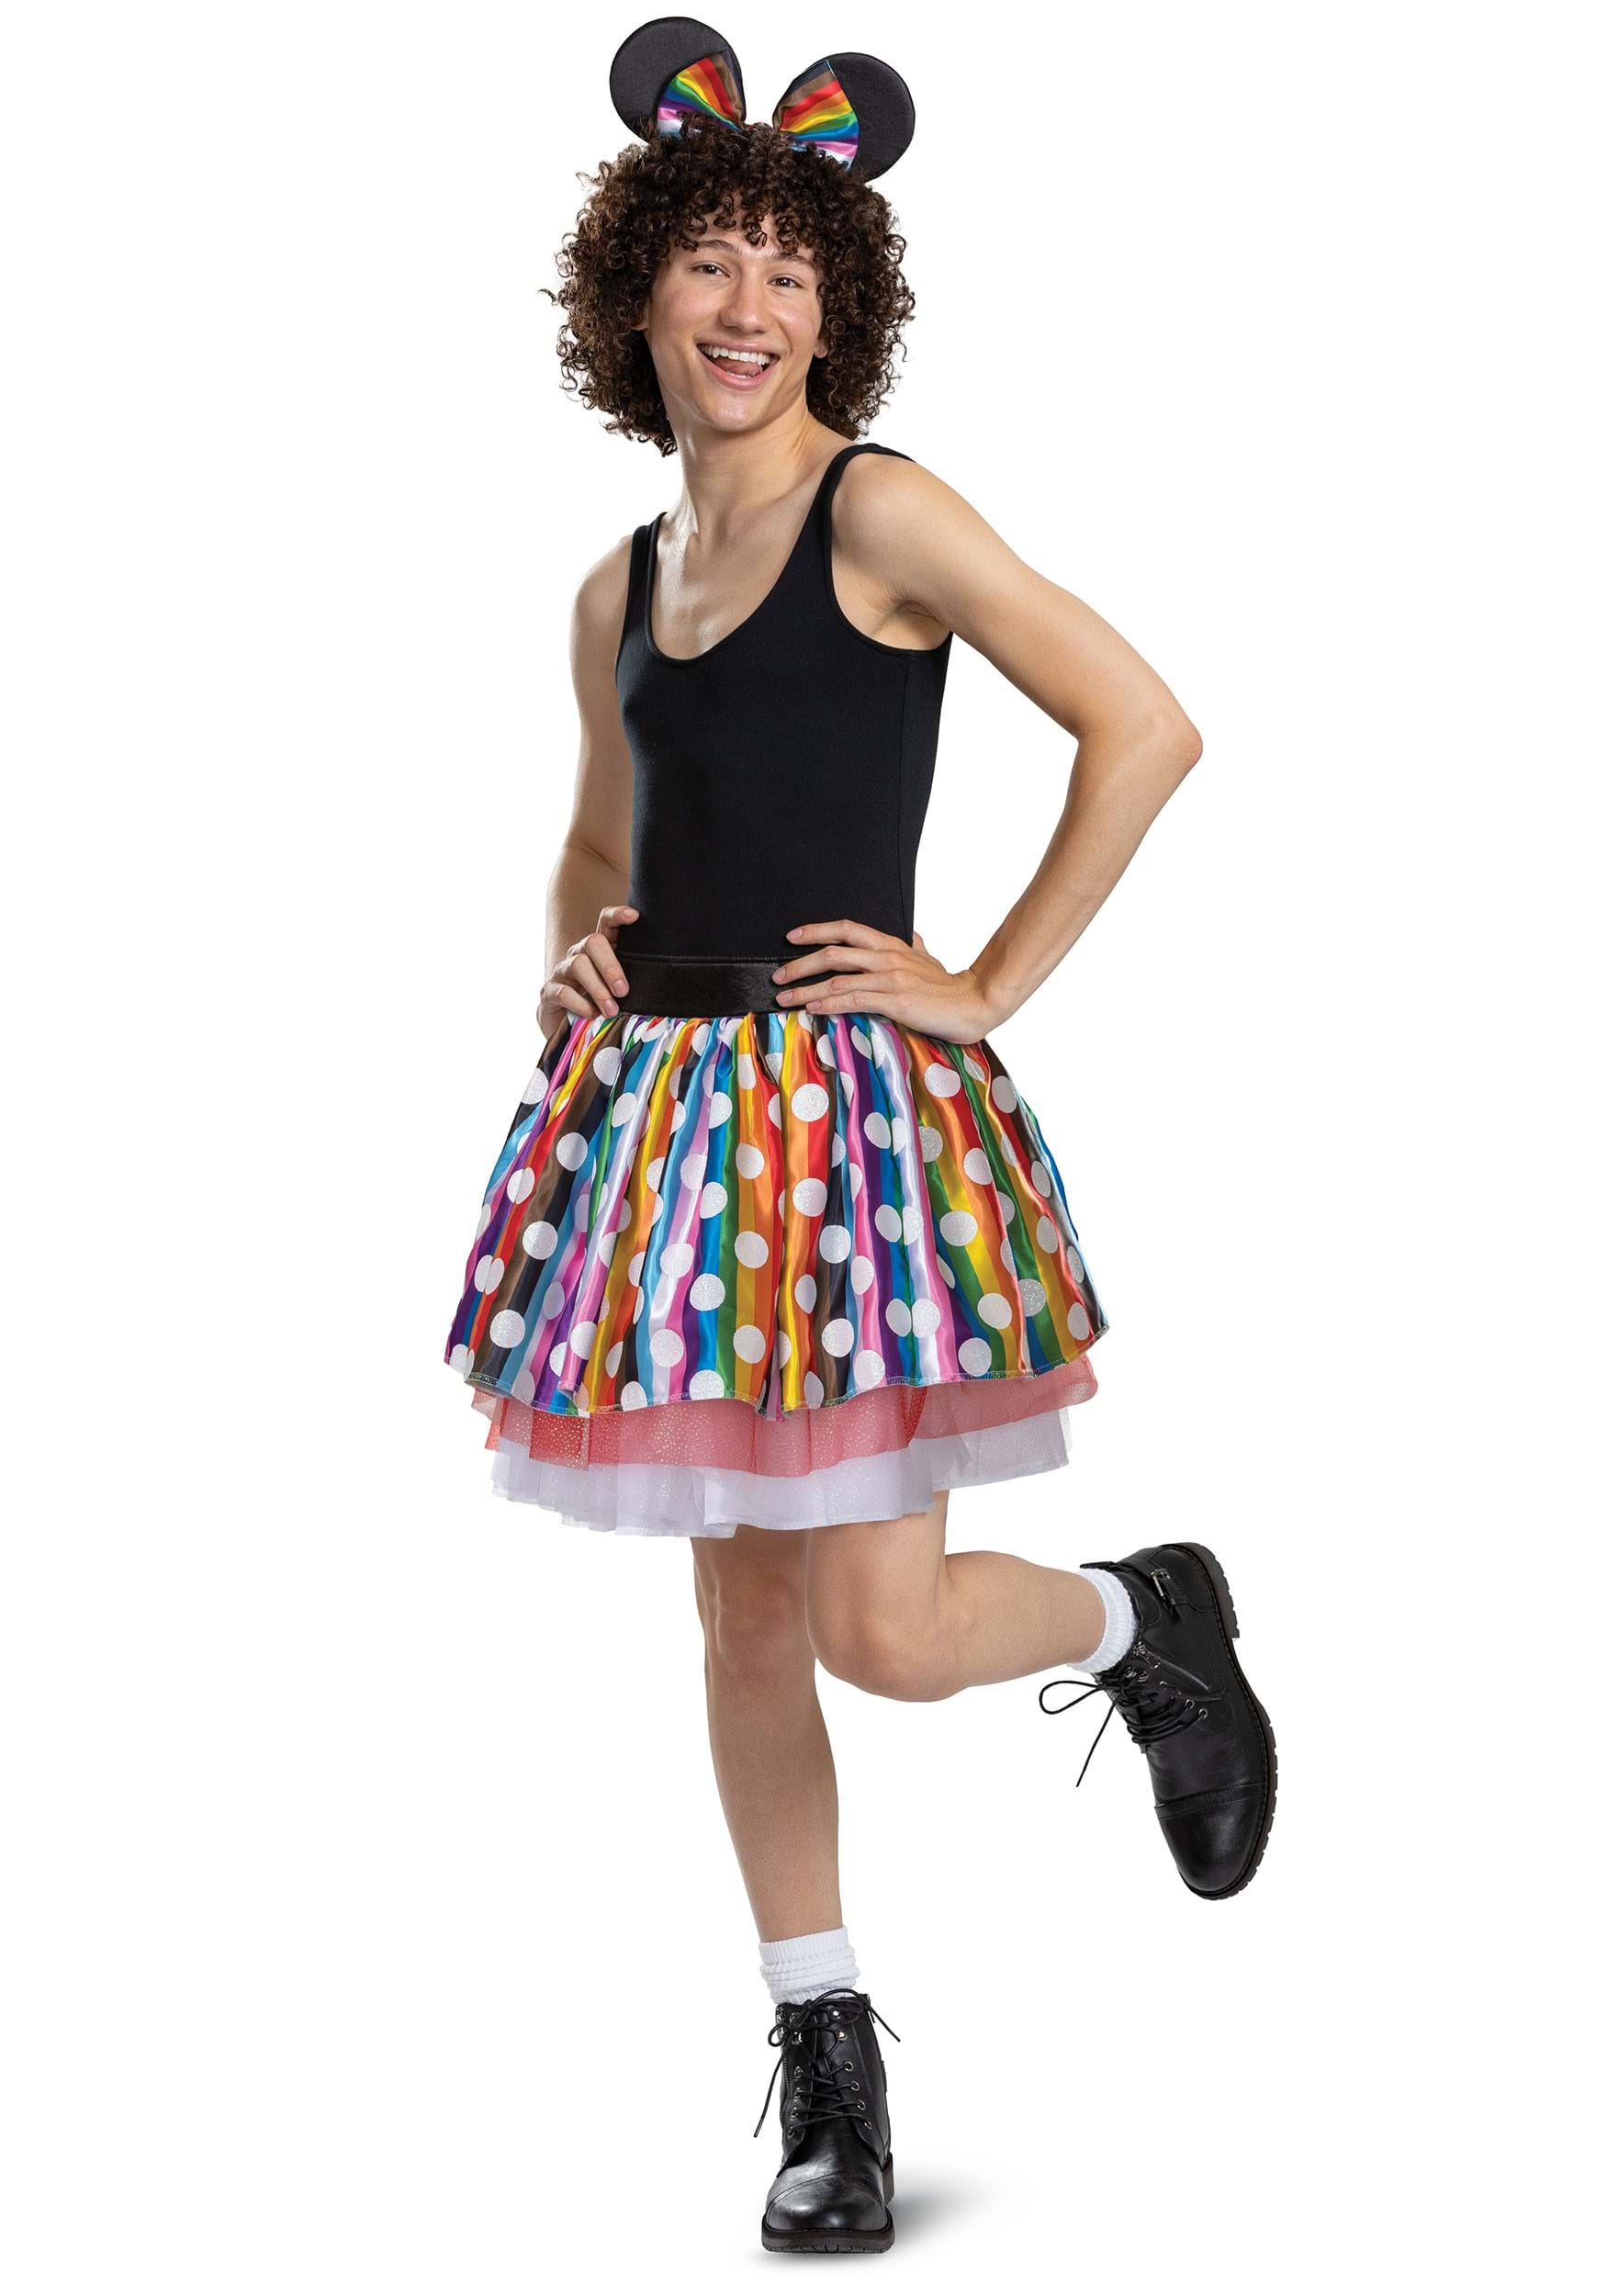 Disney Pride Minnie Mouse Fancy Dress Costume For Adults